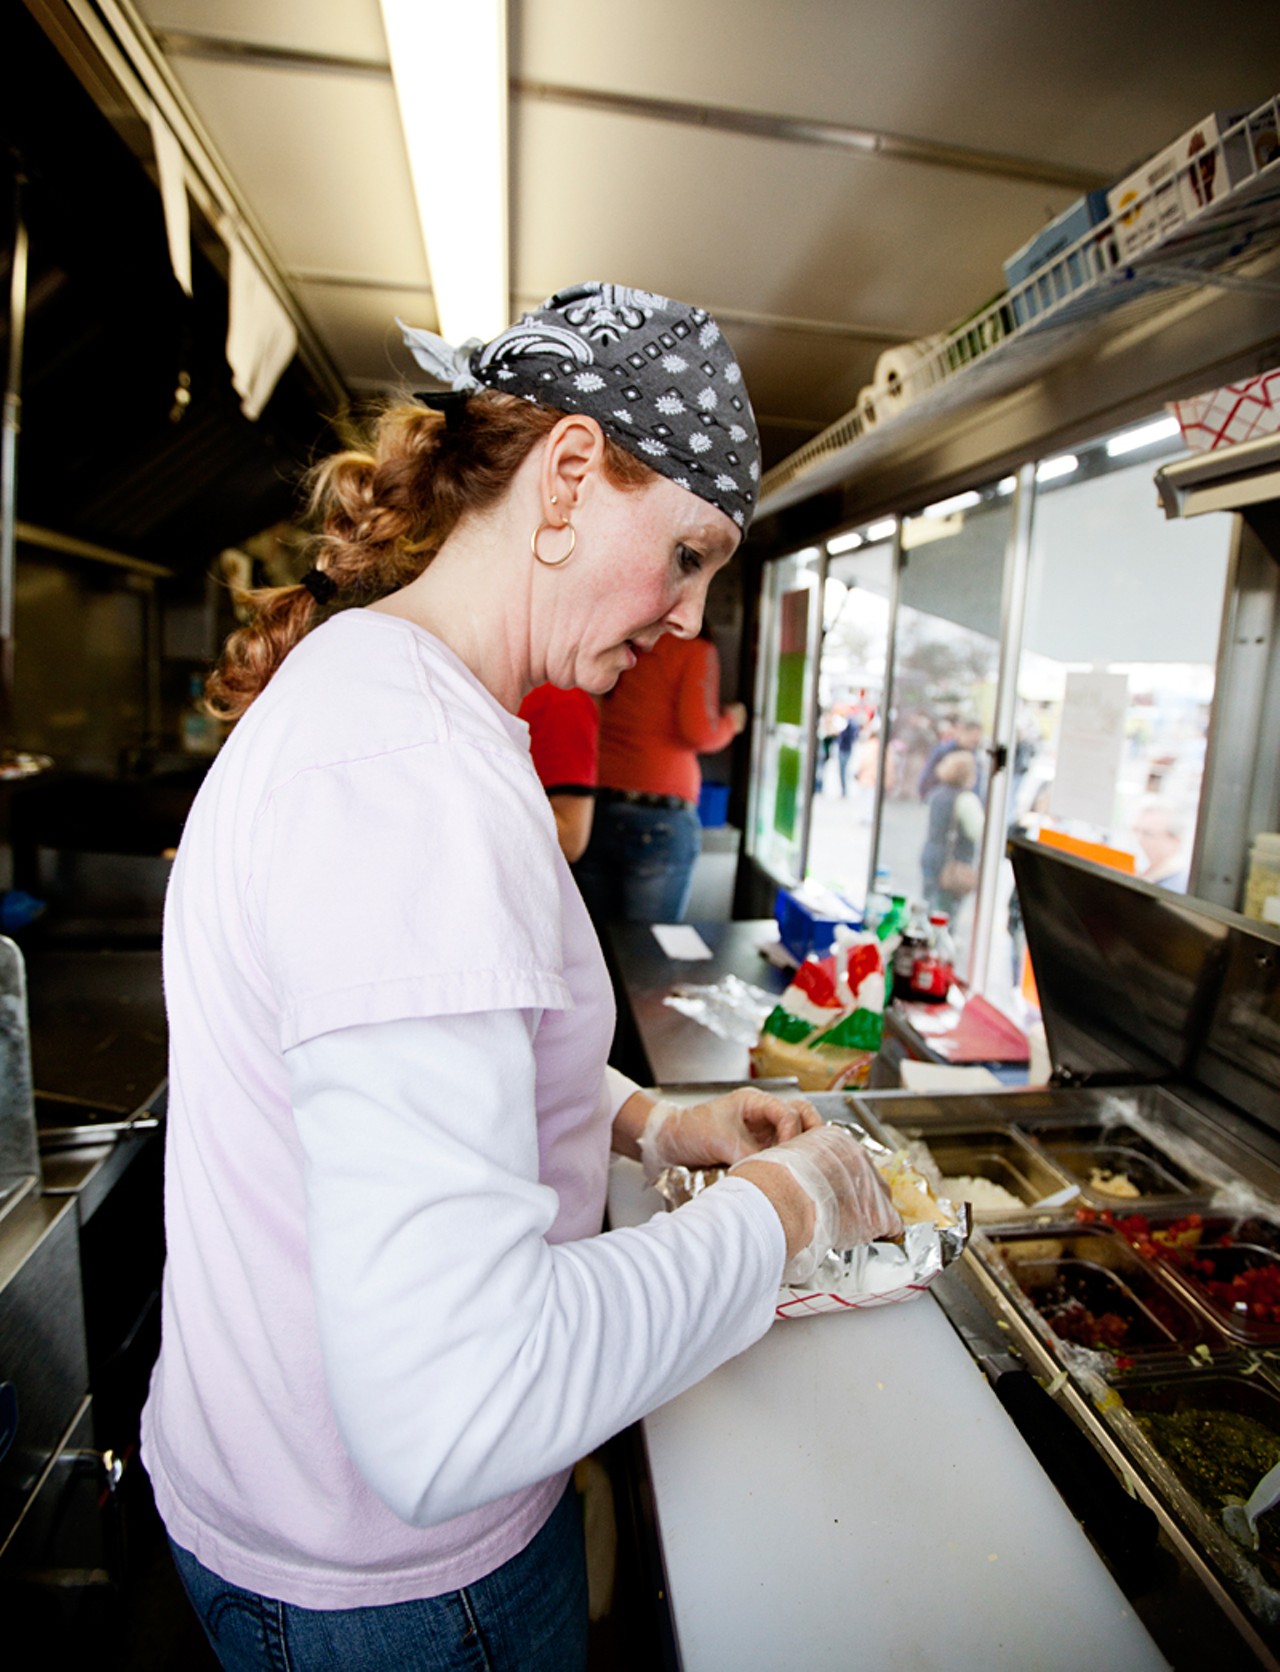 Shelley McMahan, owner of Shell's Coastal Cuisine, at work in the food truck.